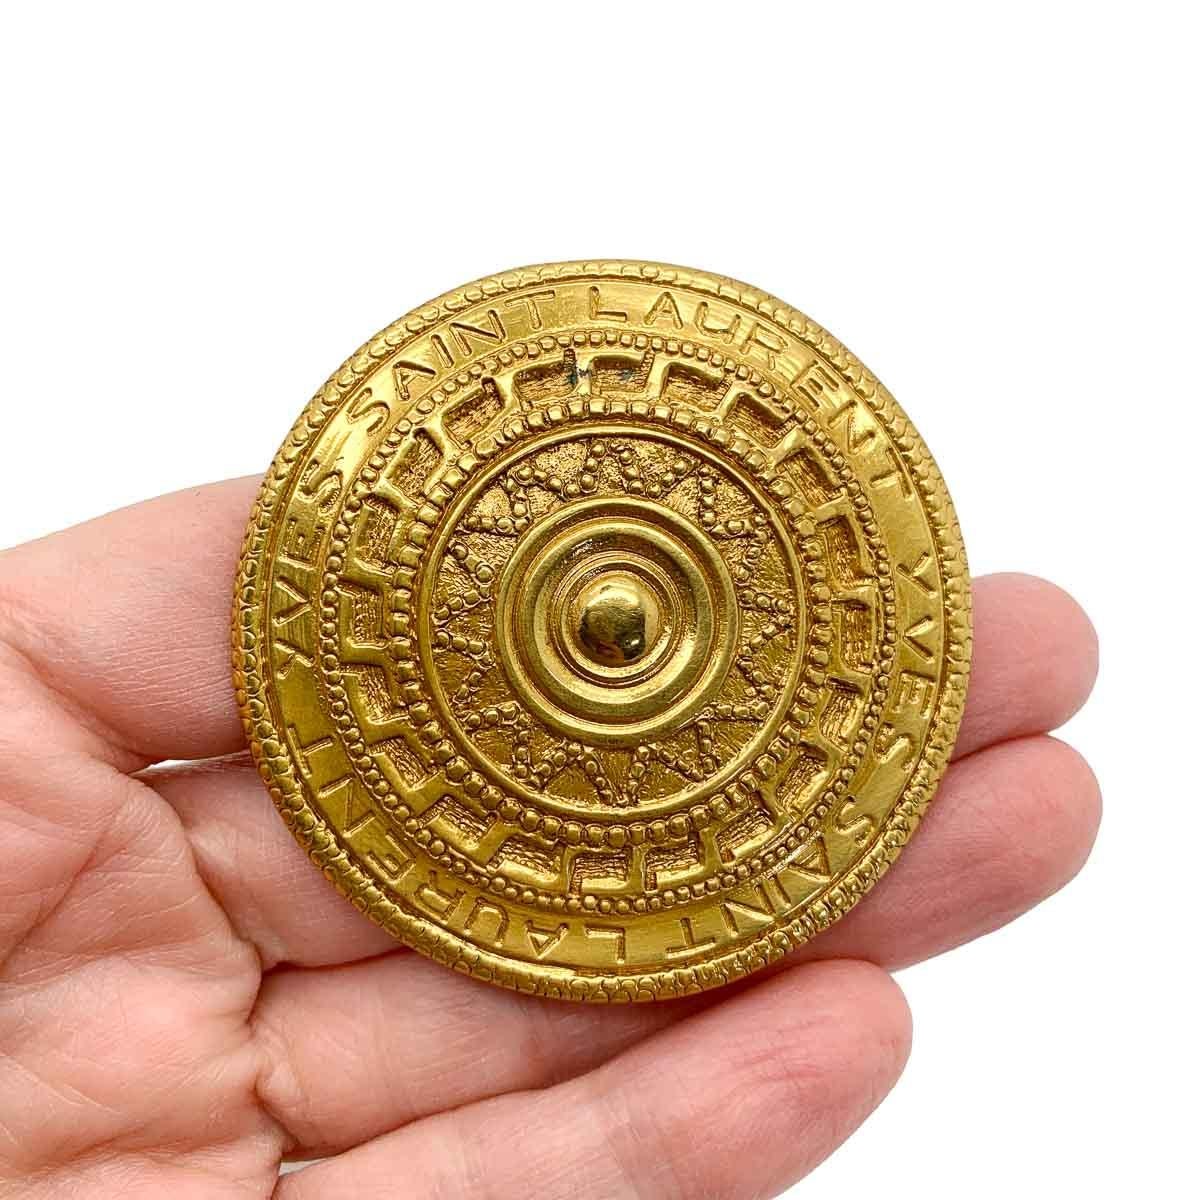 A wonderful vintage Yves Saint Laurent shield brooch. Featuring a large target style plaque embellished with engraving depicting concentric patterned circles and the name Yves Saint Laurent twice around edge.
In 1961, following his time as Dior's